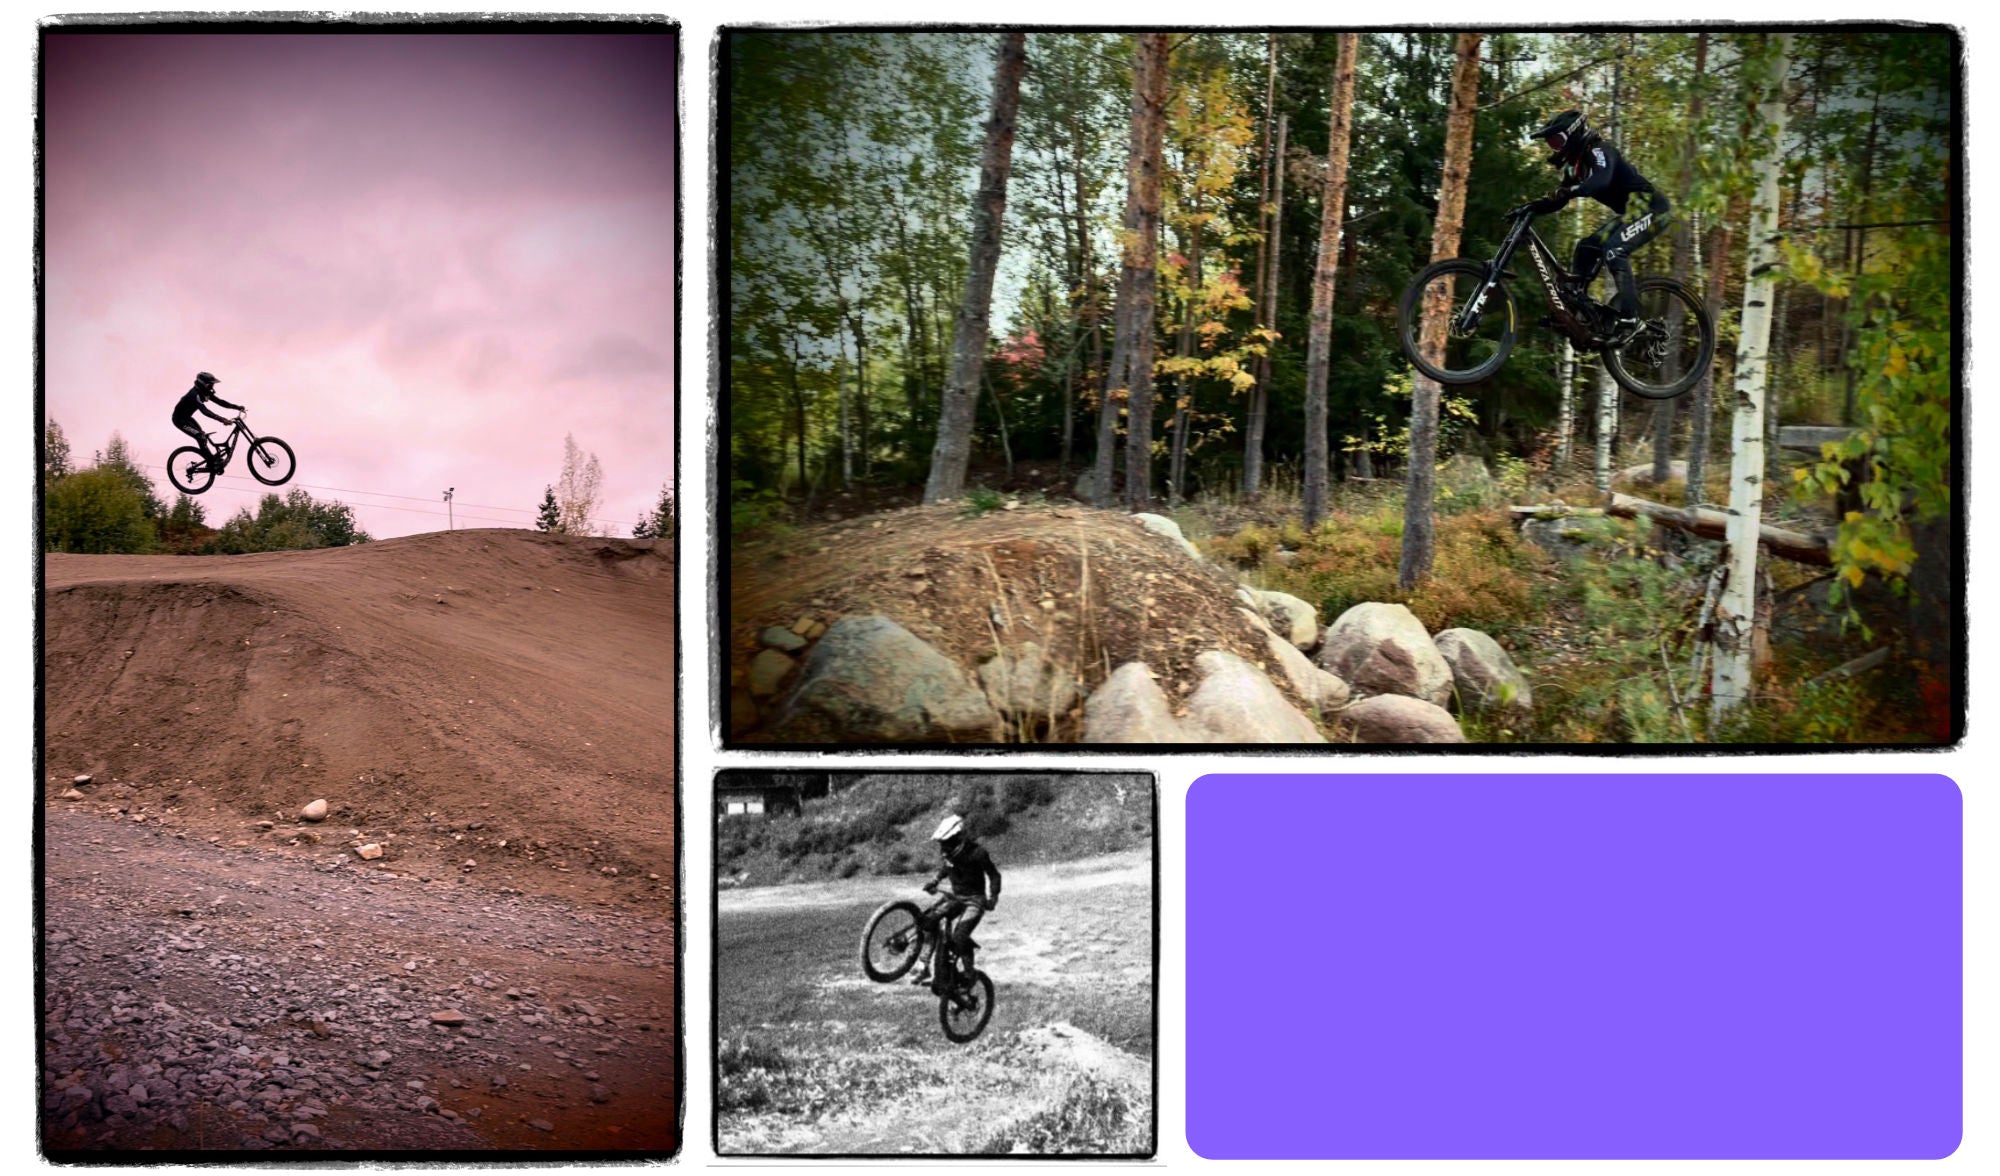 Alt text: Collage of images showing Marjo, a DH biking athlete on her bikein various jumping positions.